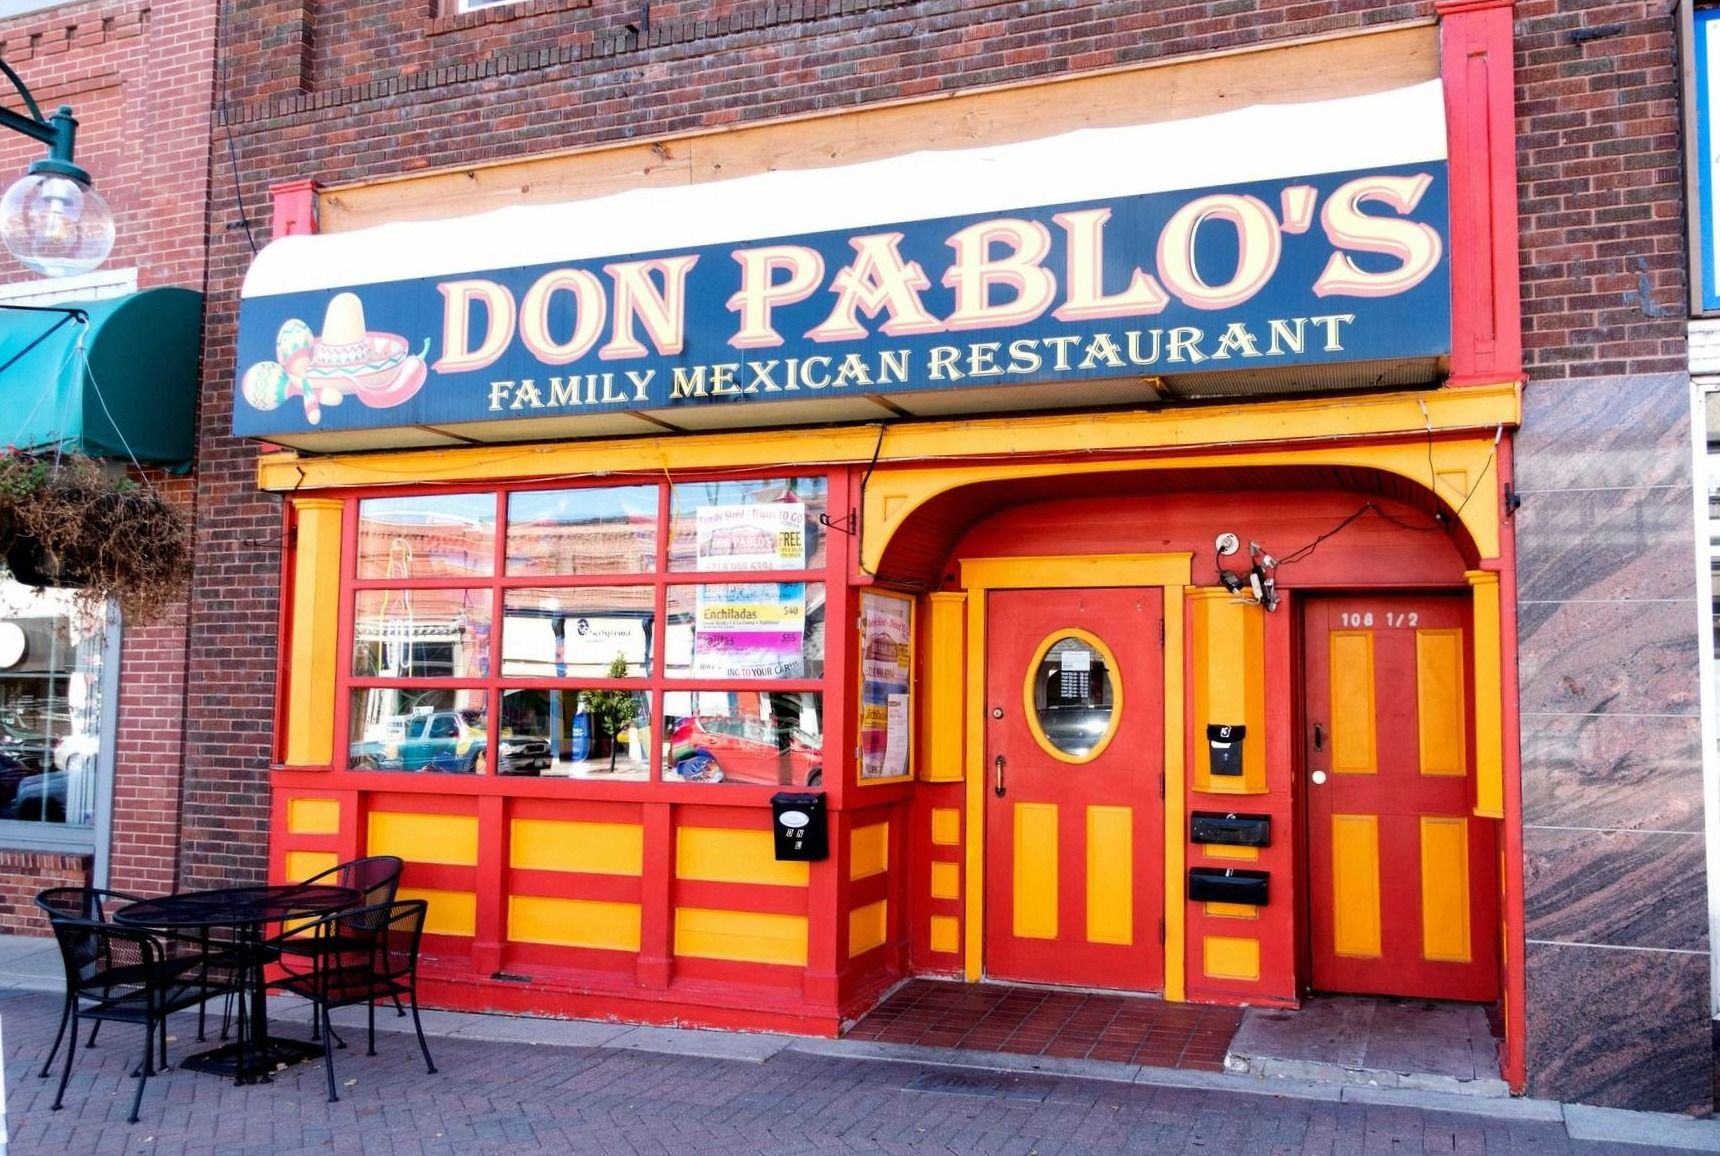 Don Pablo's Family Mexican Restaurant storefront